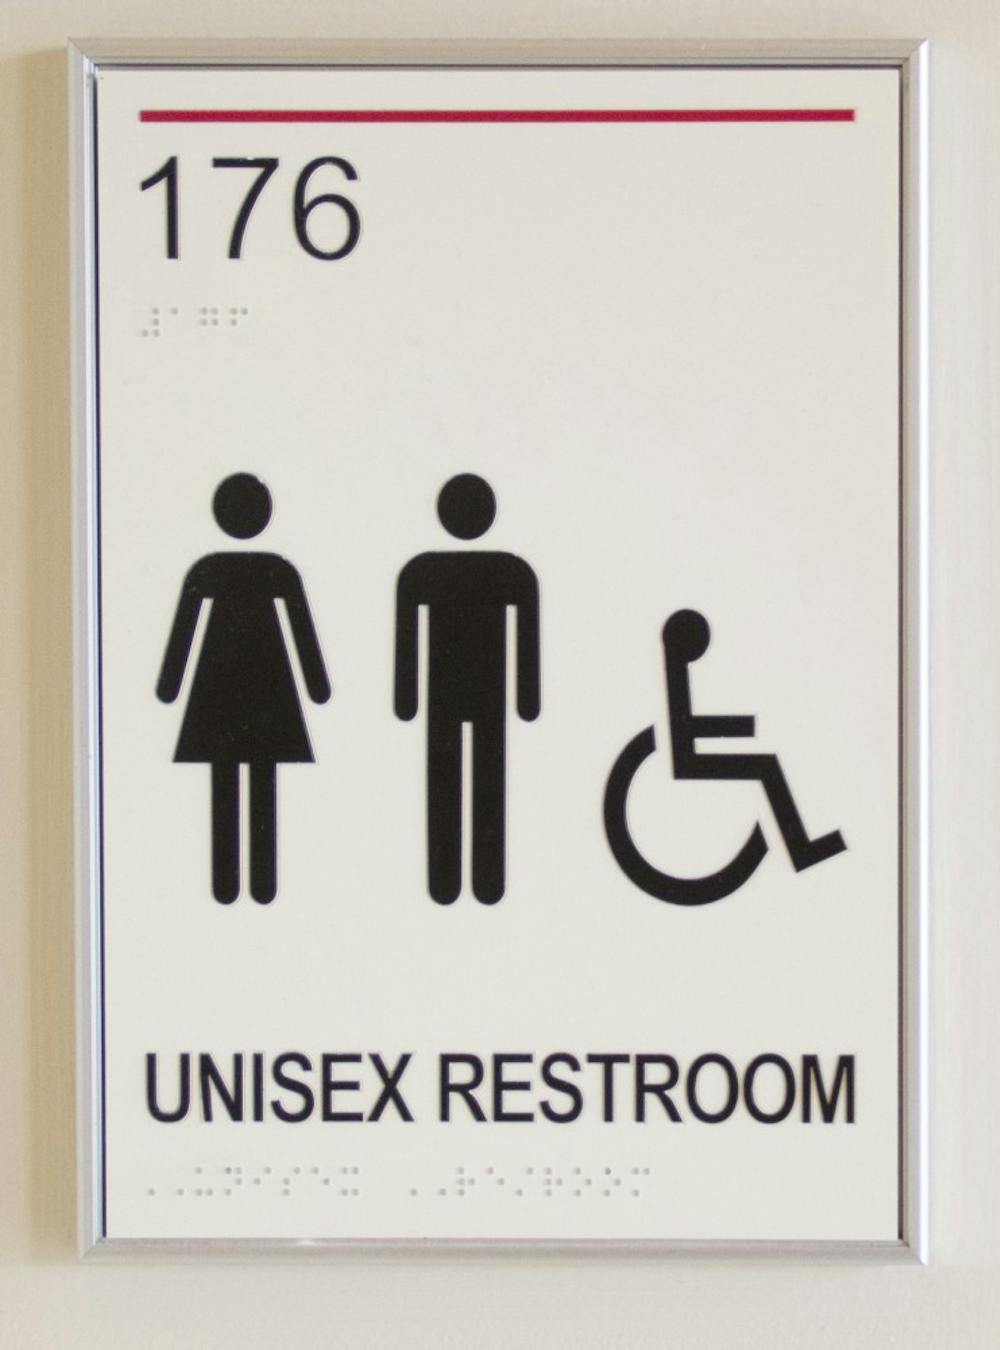 <p>An Indiana senator has proposed a bill that would make it illegal for people to enter a restroom or locker room that doesn’t match their gender, while Ball State’s Student Government Association is proposing the opposite. The university is currently trying to get gender neutral restrooms. <em>DN FILE PHOTO EMMA ROGERS</em></p>